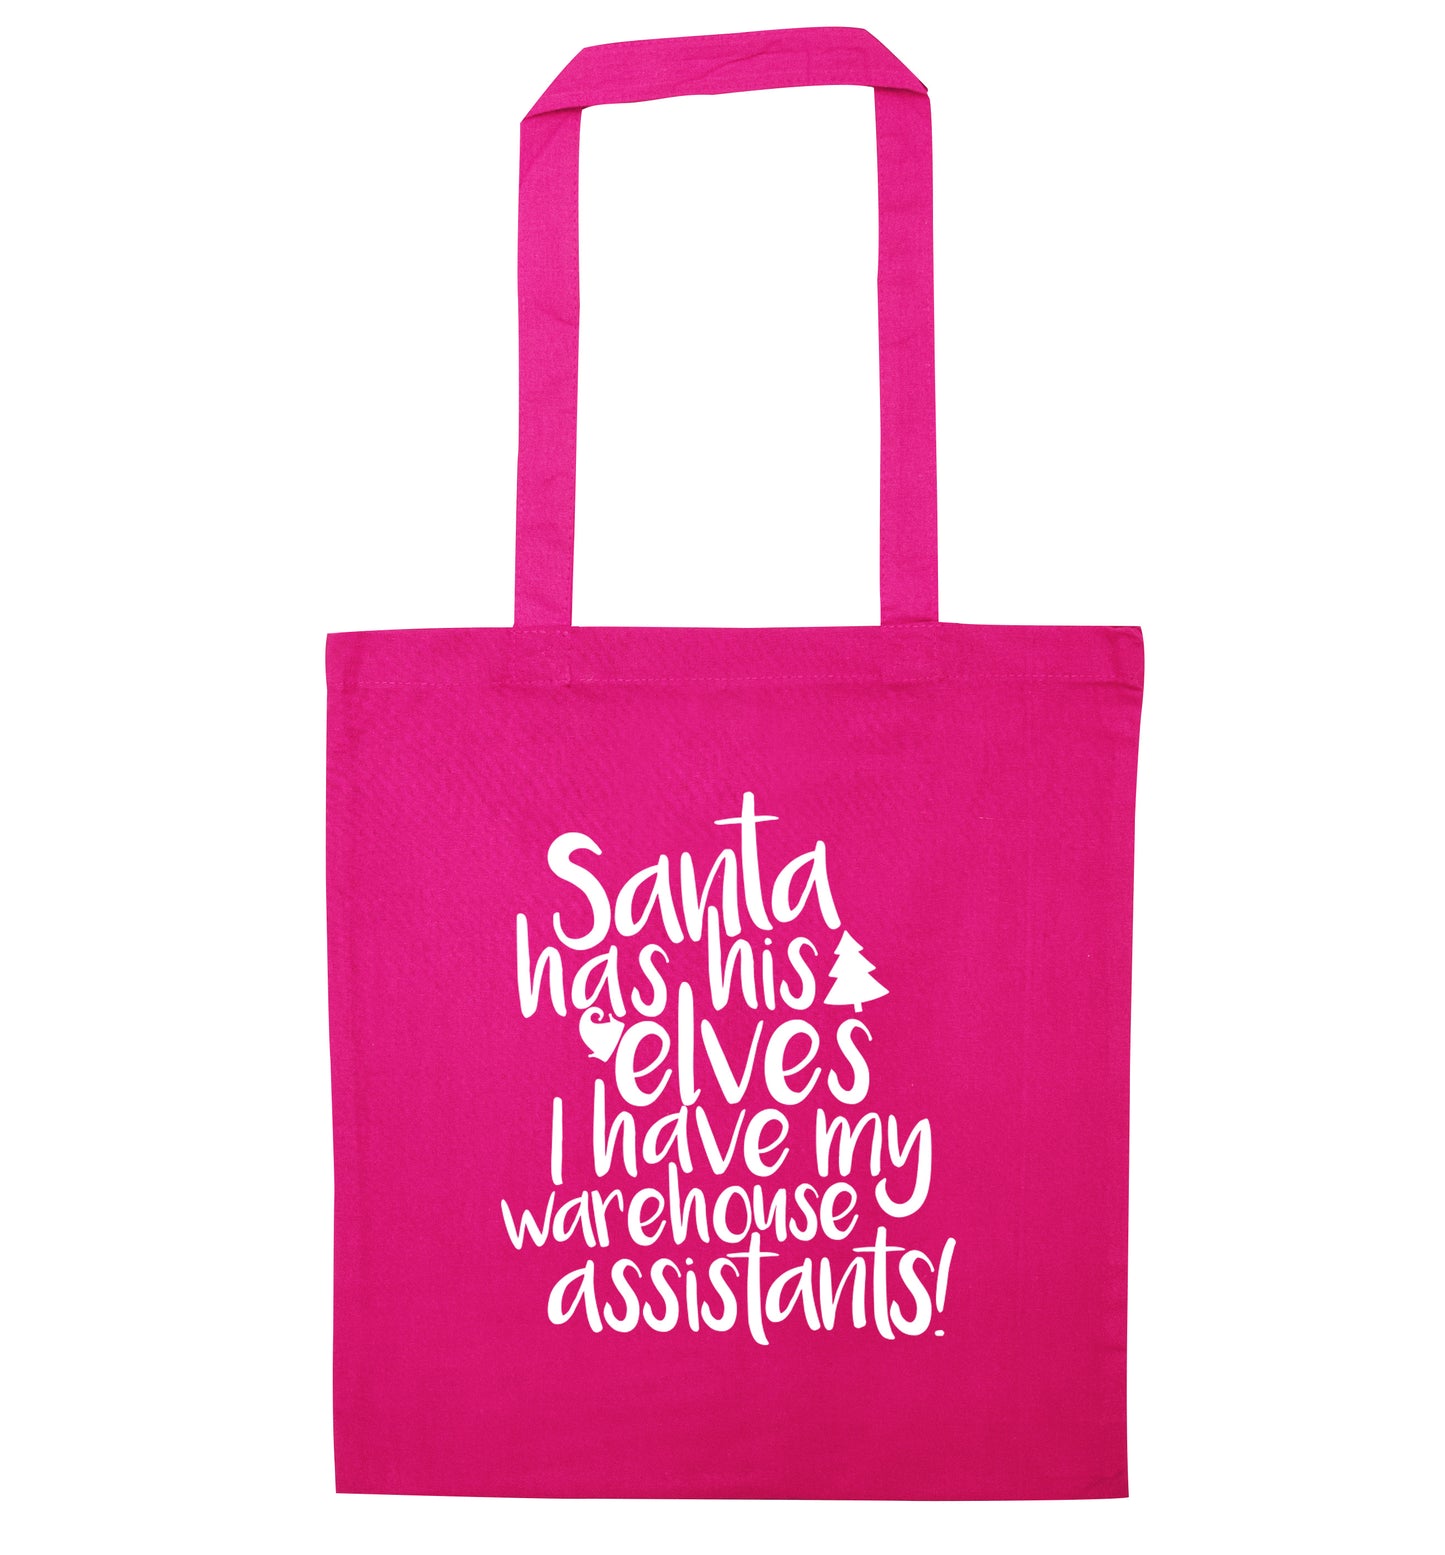 Santa has his elves I have my warehouse assistants pink tote bag